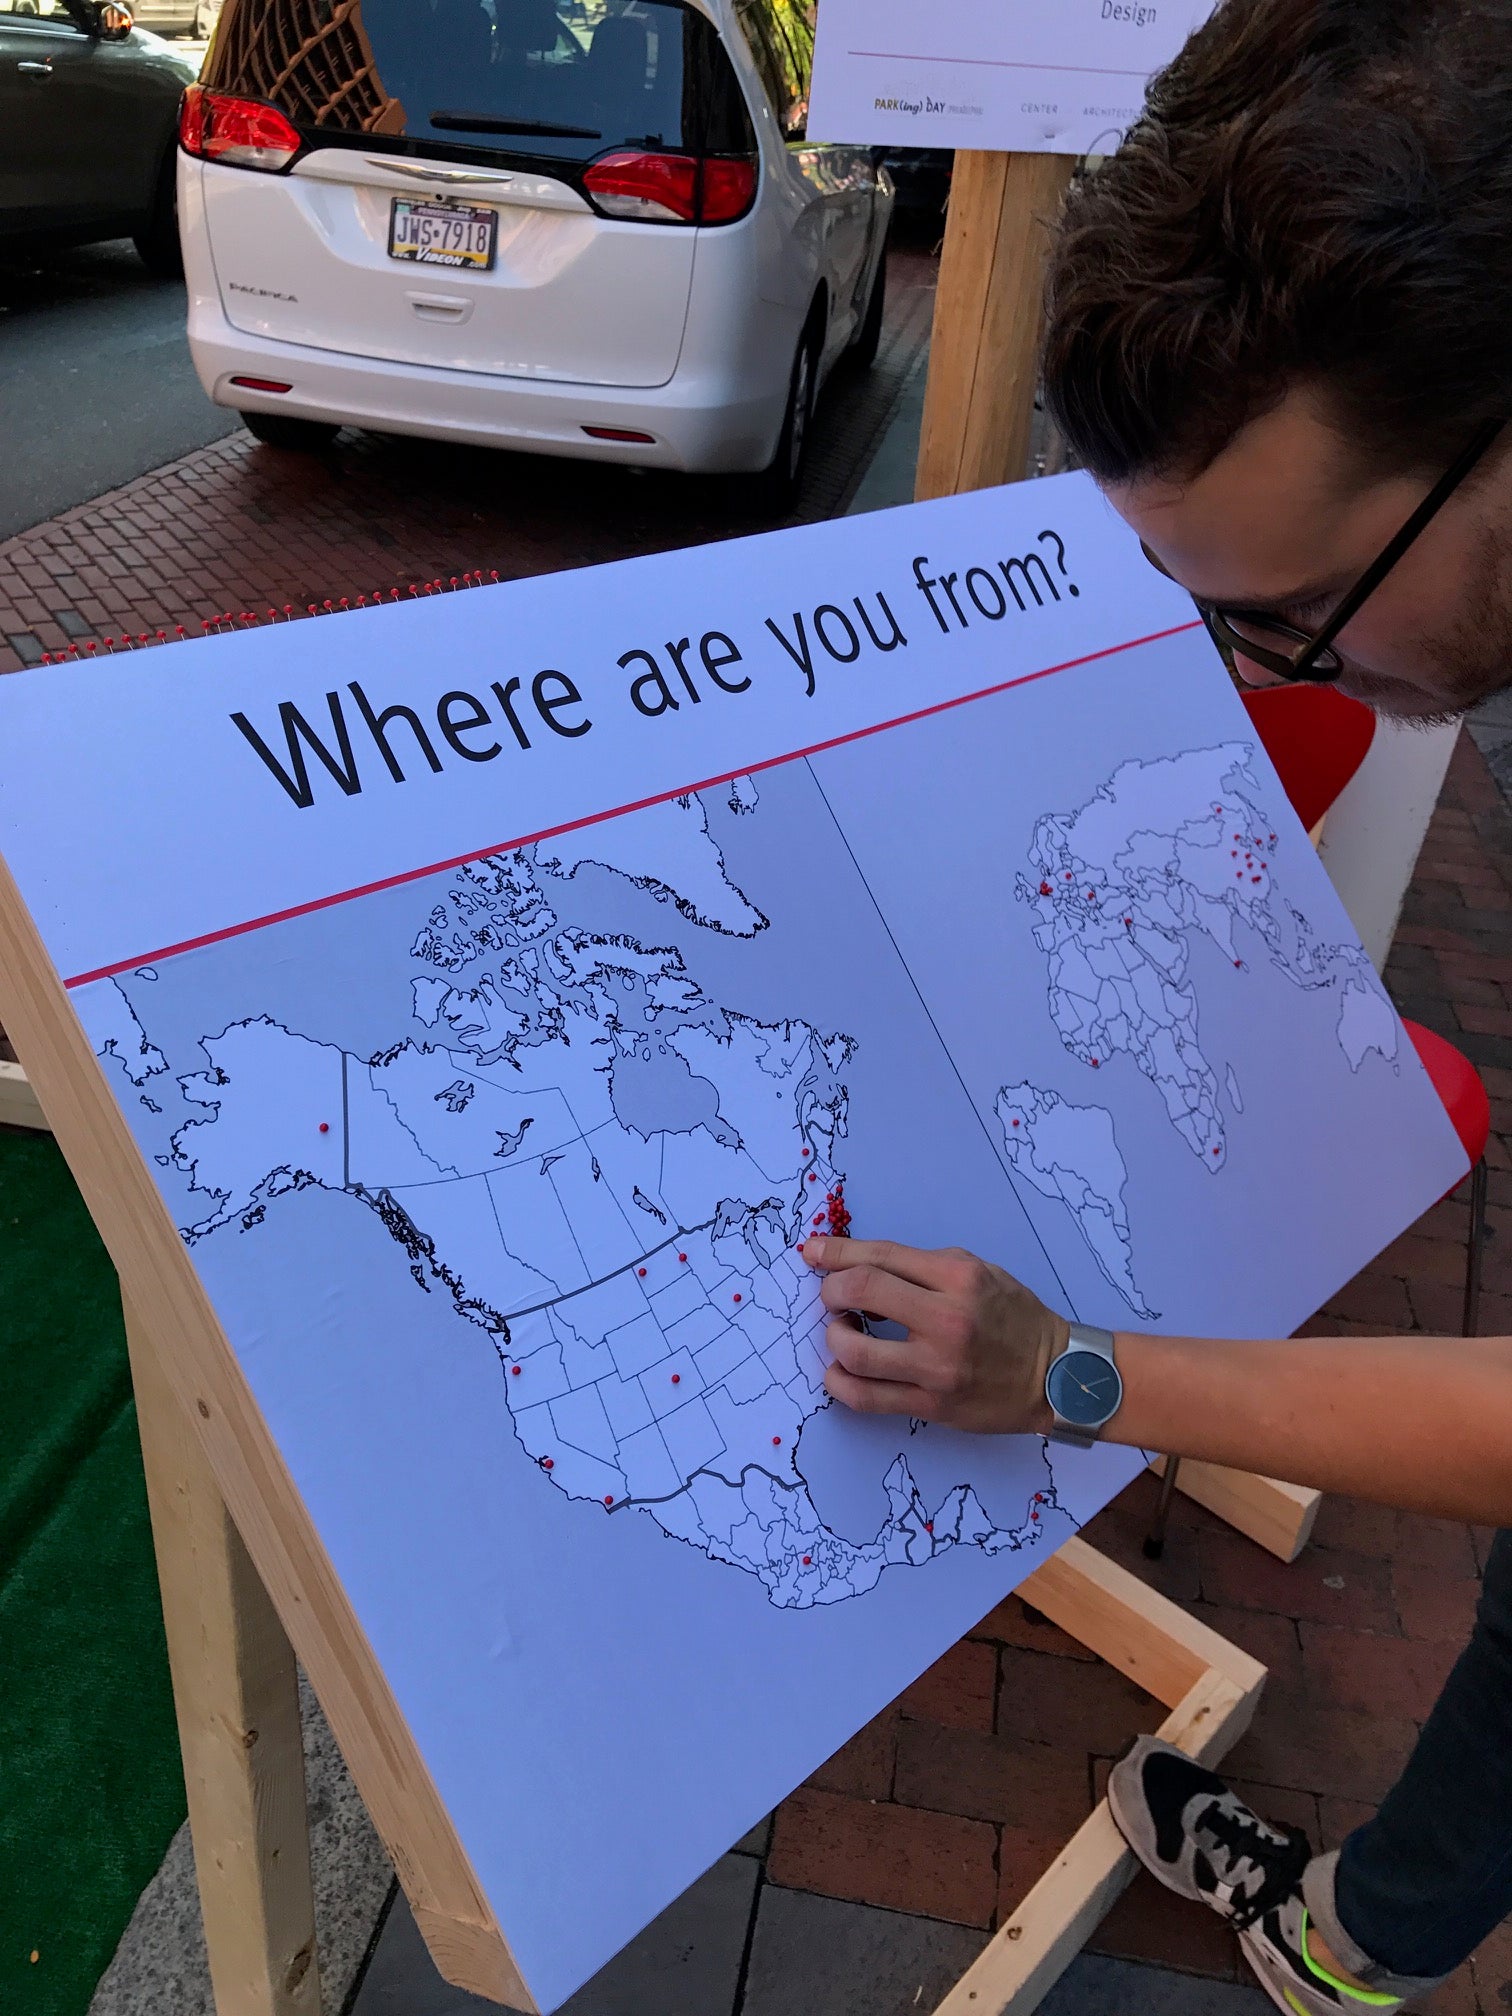 Joe Thomas interacts with Cloud Gehshan Placemaking's Where are you from? at Market and 4th on Park(ing) Day 2017